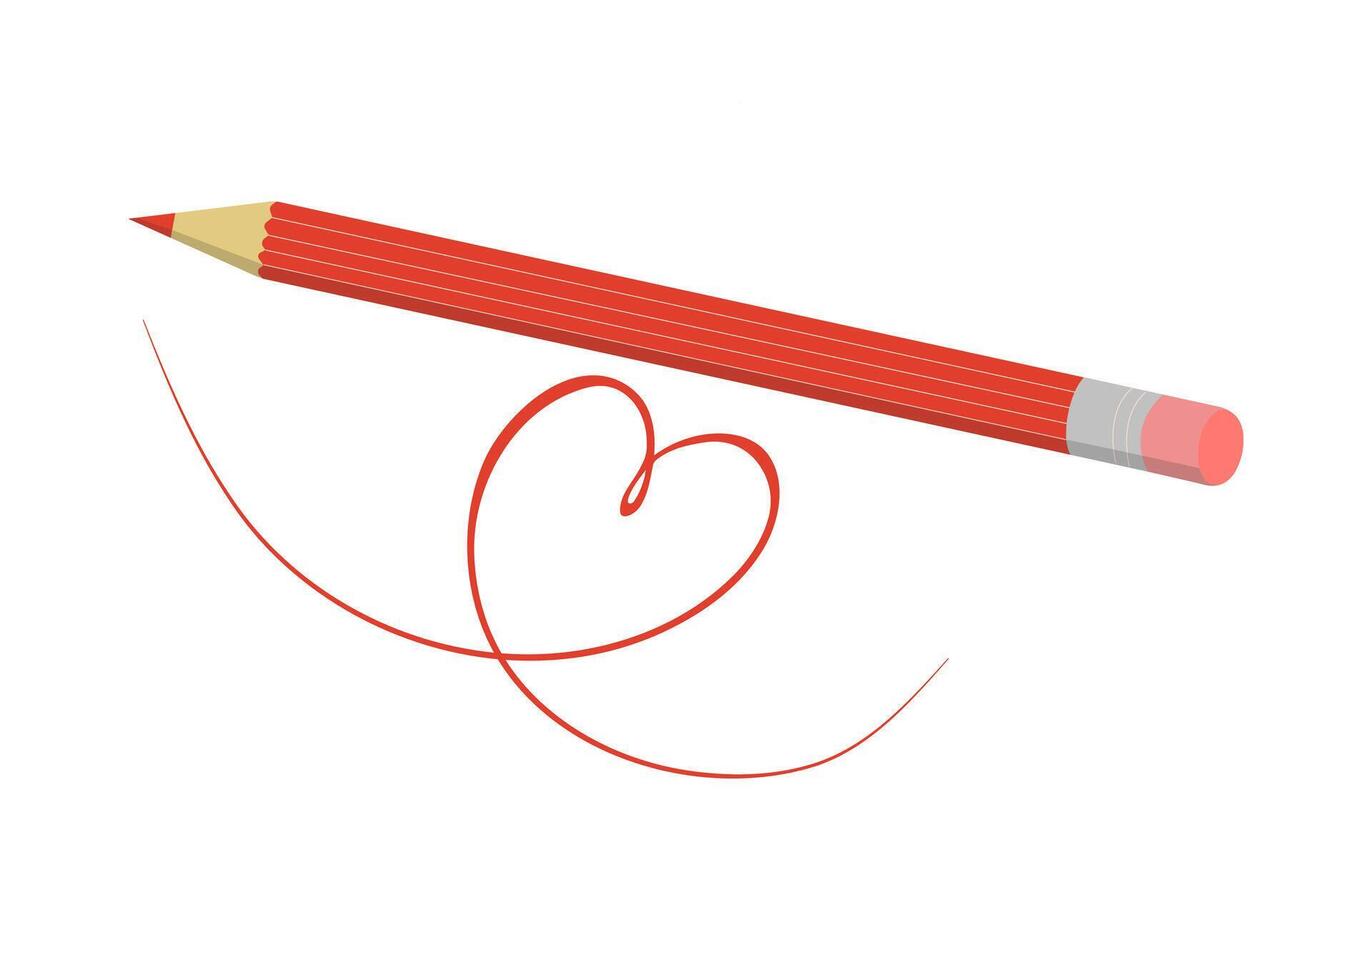 Pencil and line drawing. Line, heart shape drawn in pencil. Stationery. Vector illustration, isolated background, white.